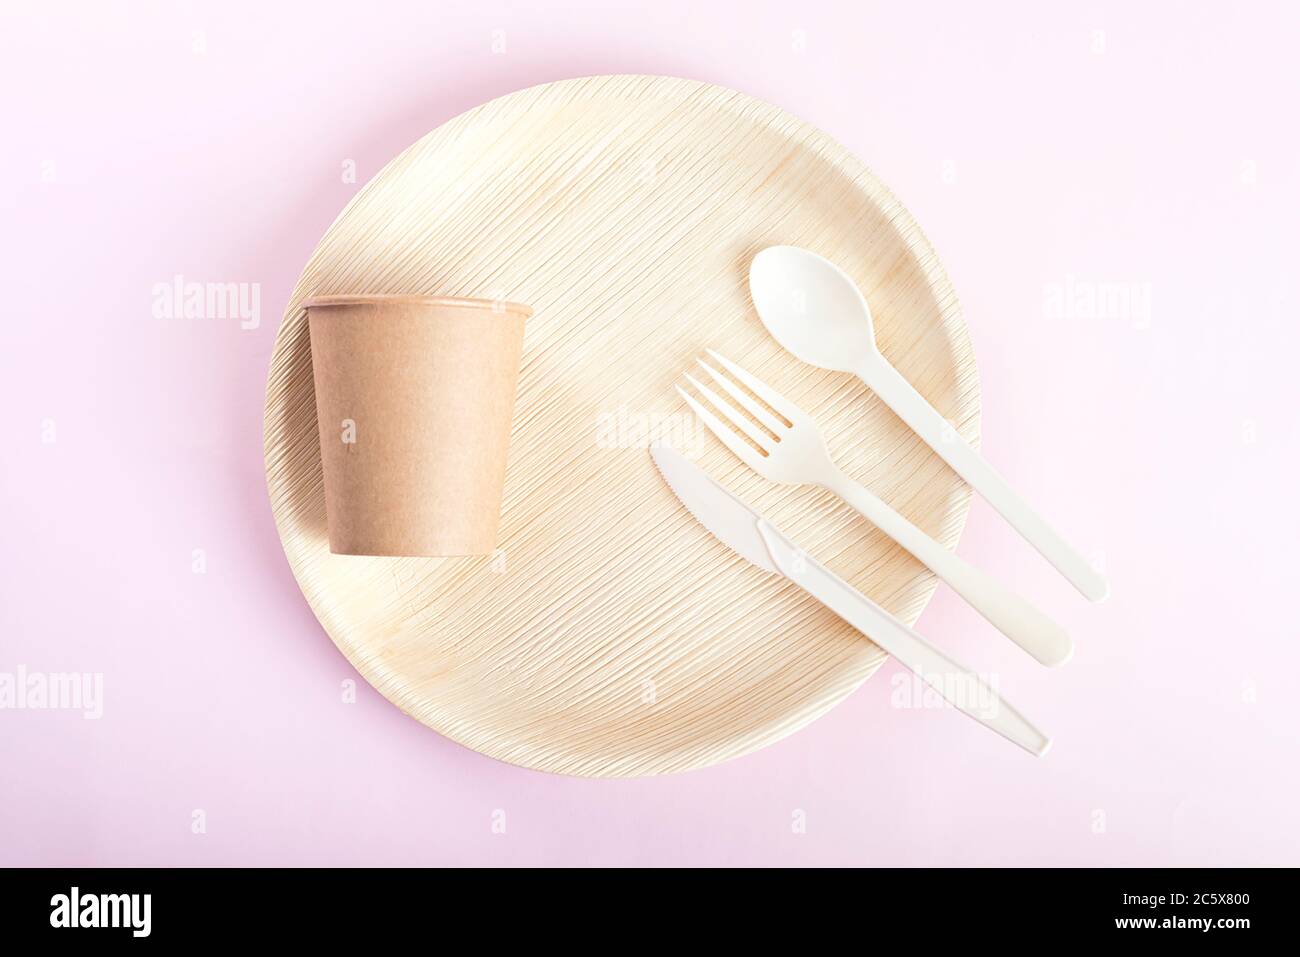 Set of disposable plate, cup, spoon, fork, knife on light pink background. Stock Photo